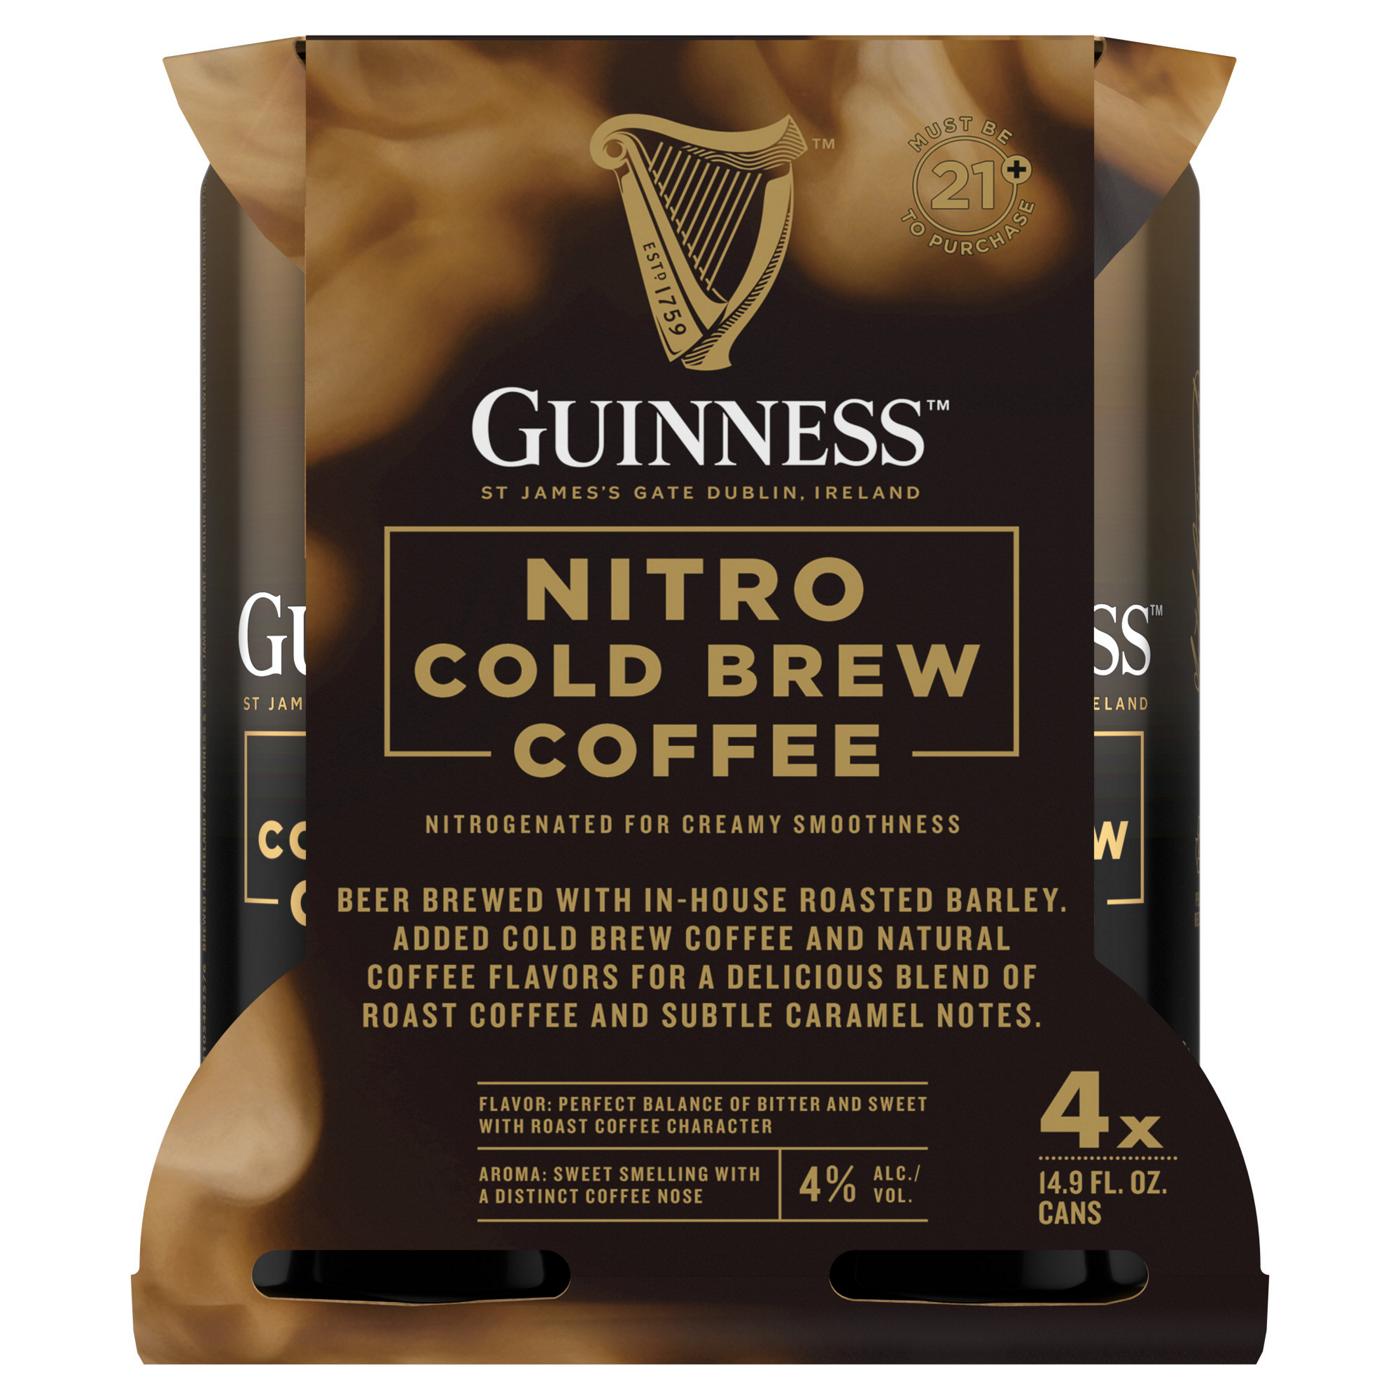 Guinness Nitro Cold Brew Coffee; image 1 of 5